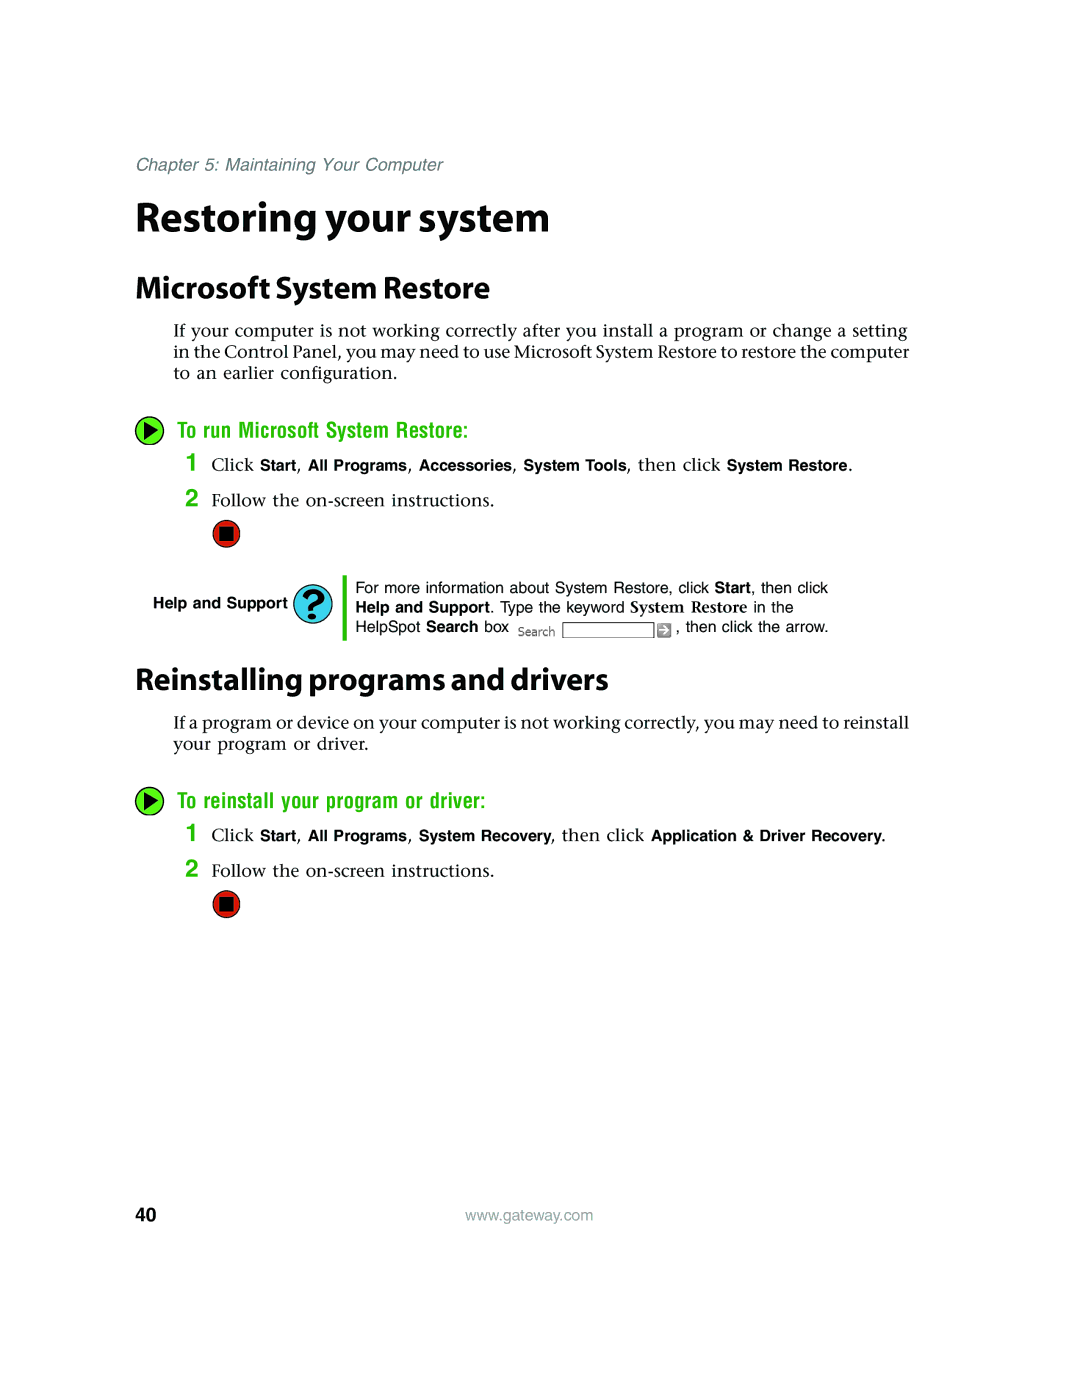 Gateway E4350 manual Restoring your system, Microsoft System Restore, Reinstalling programs and drivers 